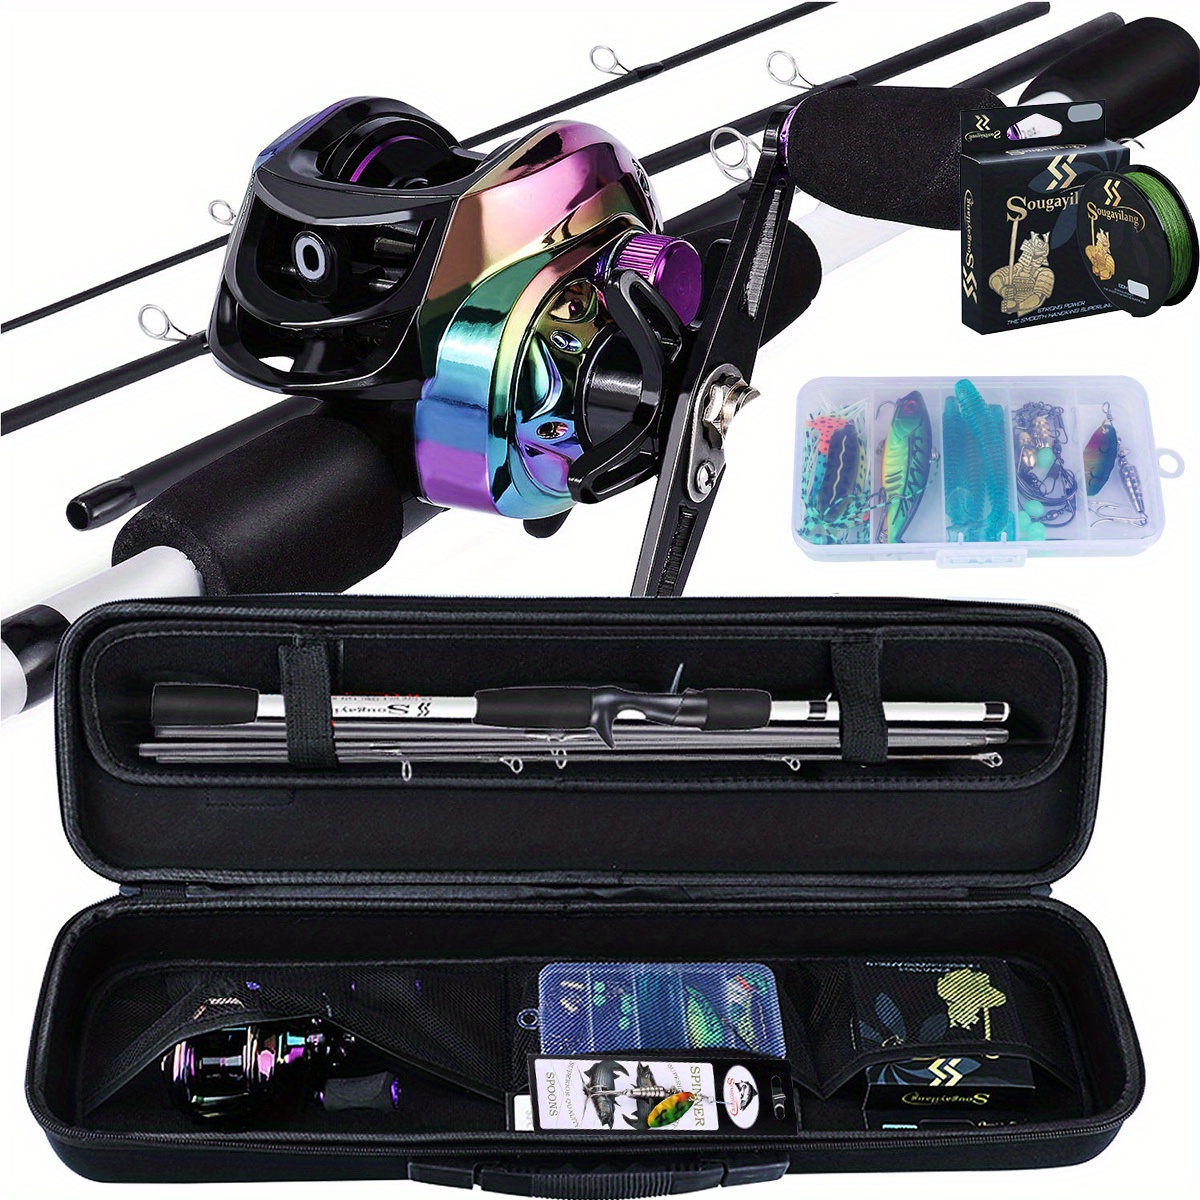 Sougayilang Fishing Full Kits Casting Rod Combo with Baitcasting Fishing  Reel Carrier Case for Convenient Travel